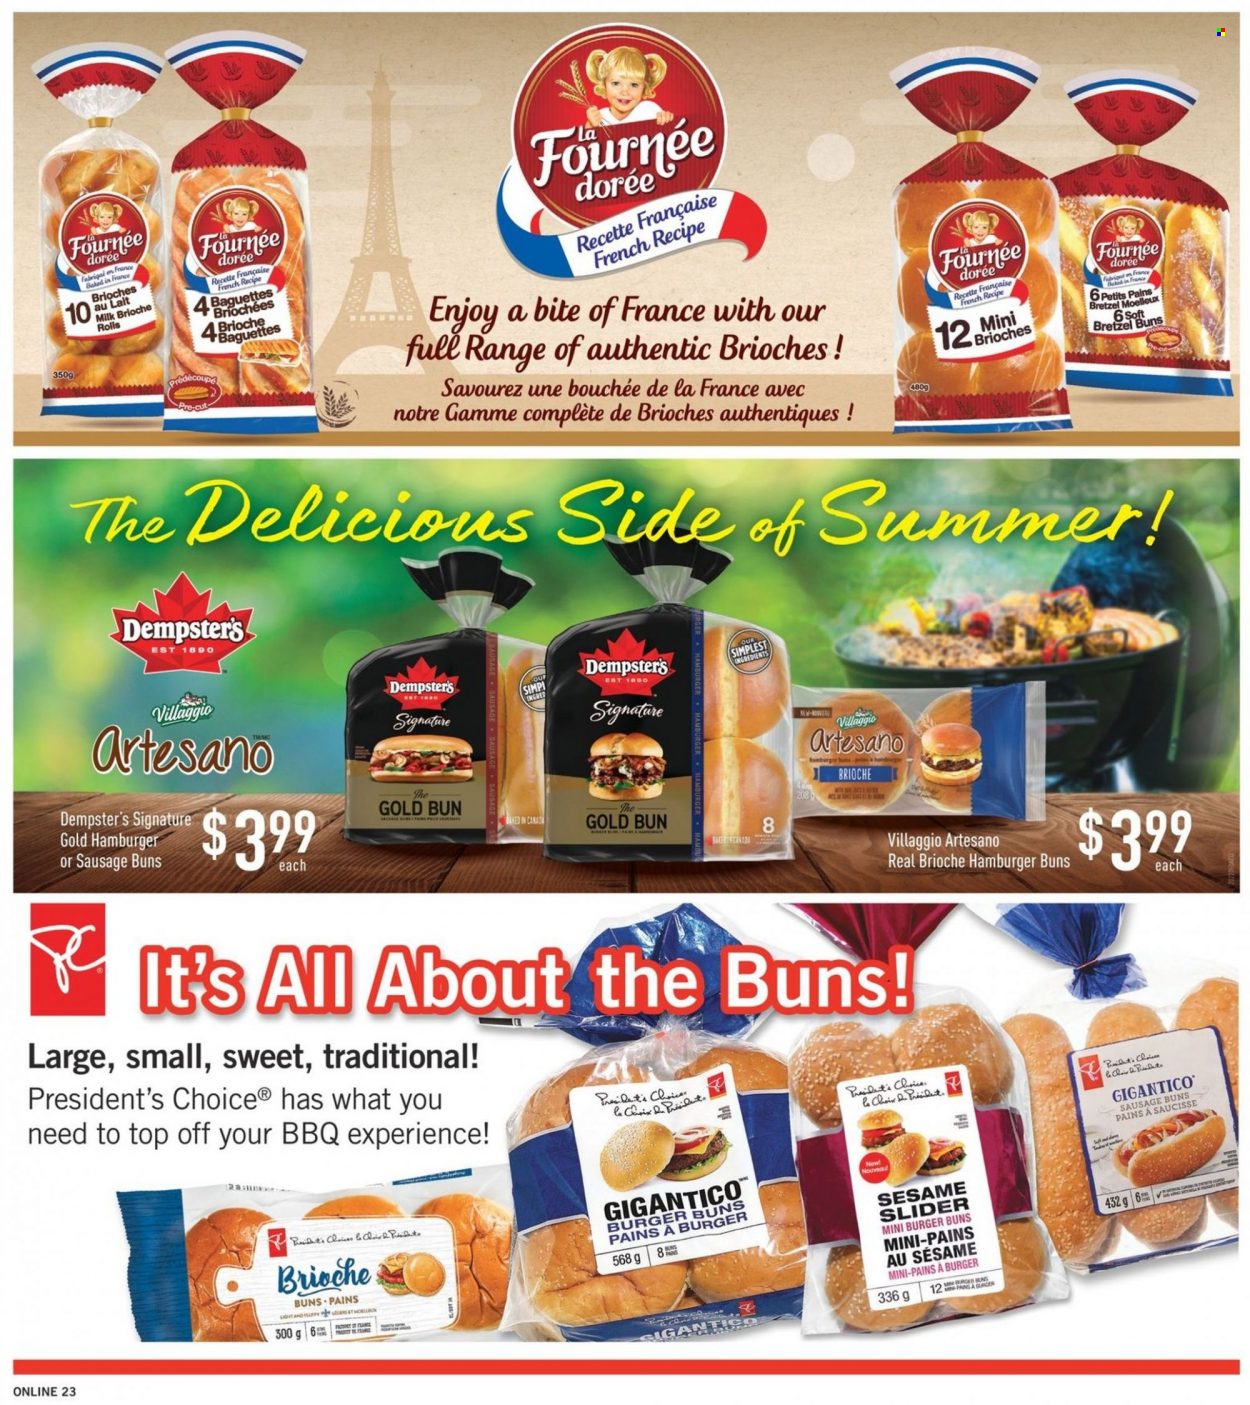 Fortinos flyer  - May 26, 2022 - June 01, 2022.